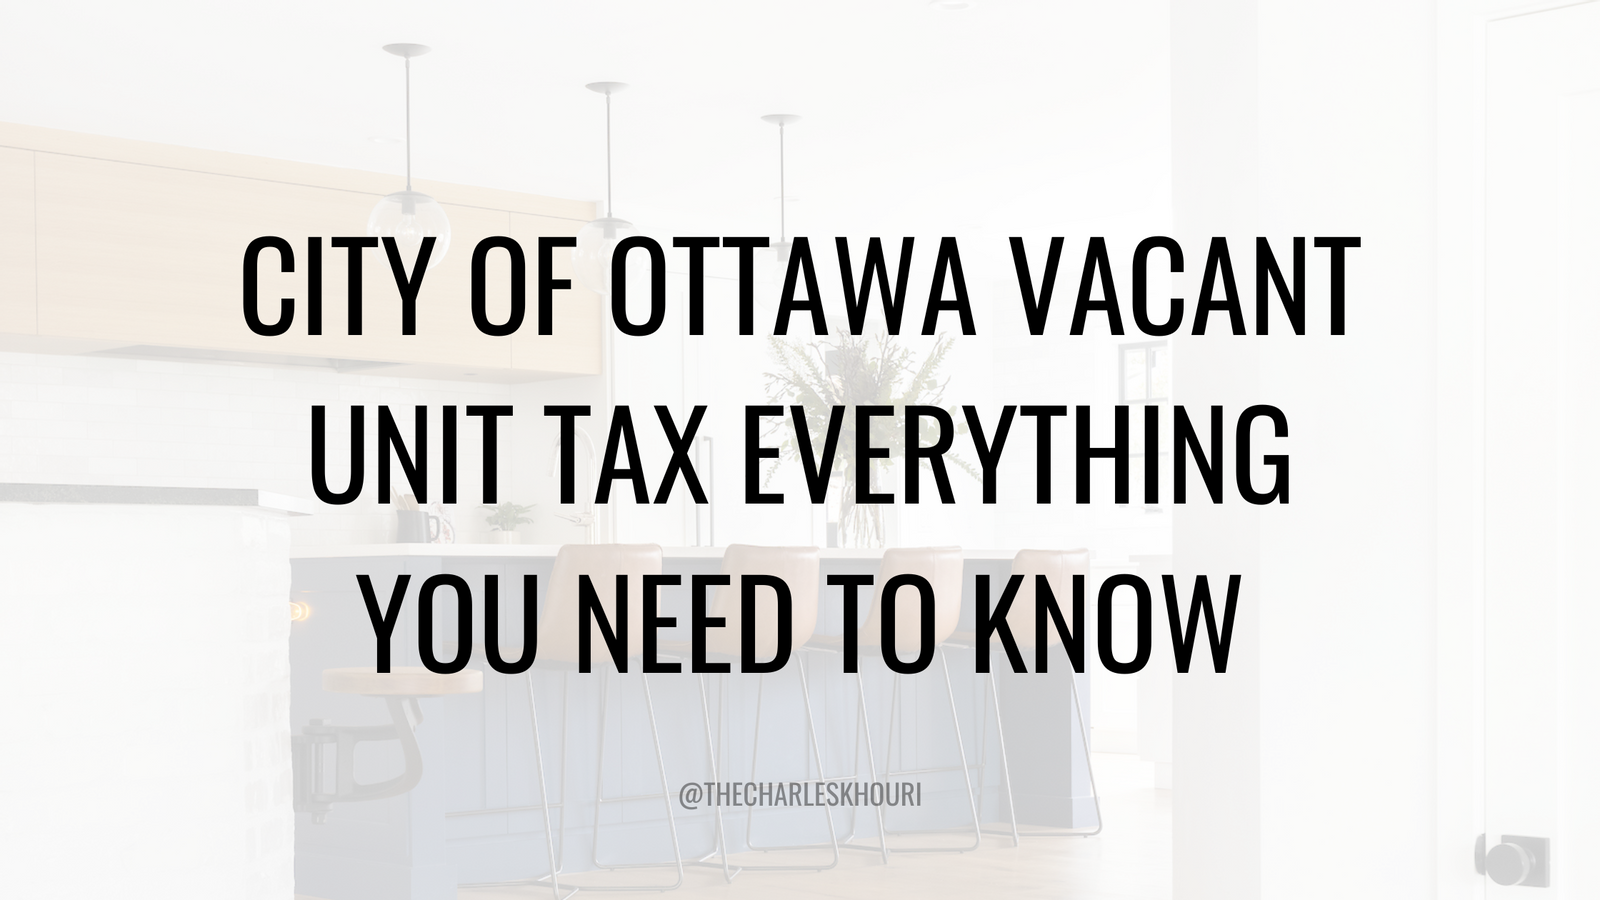 City of Ottawa Vacant Unit Tax or VUT - Everything you need to know